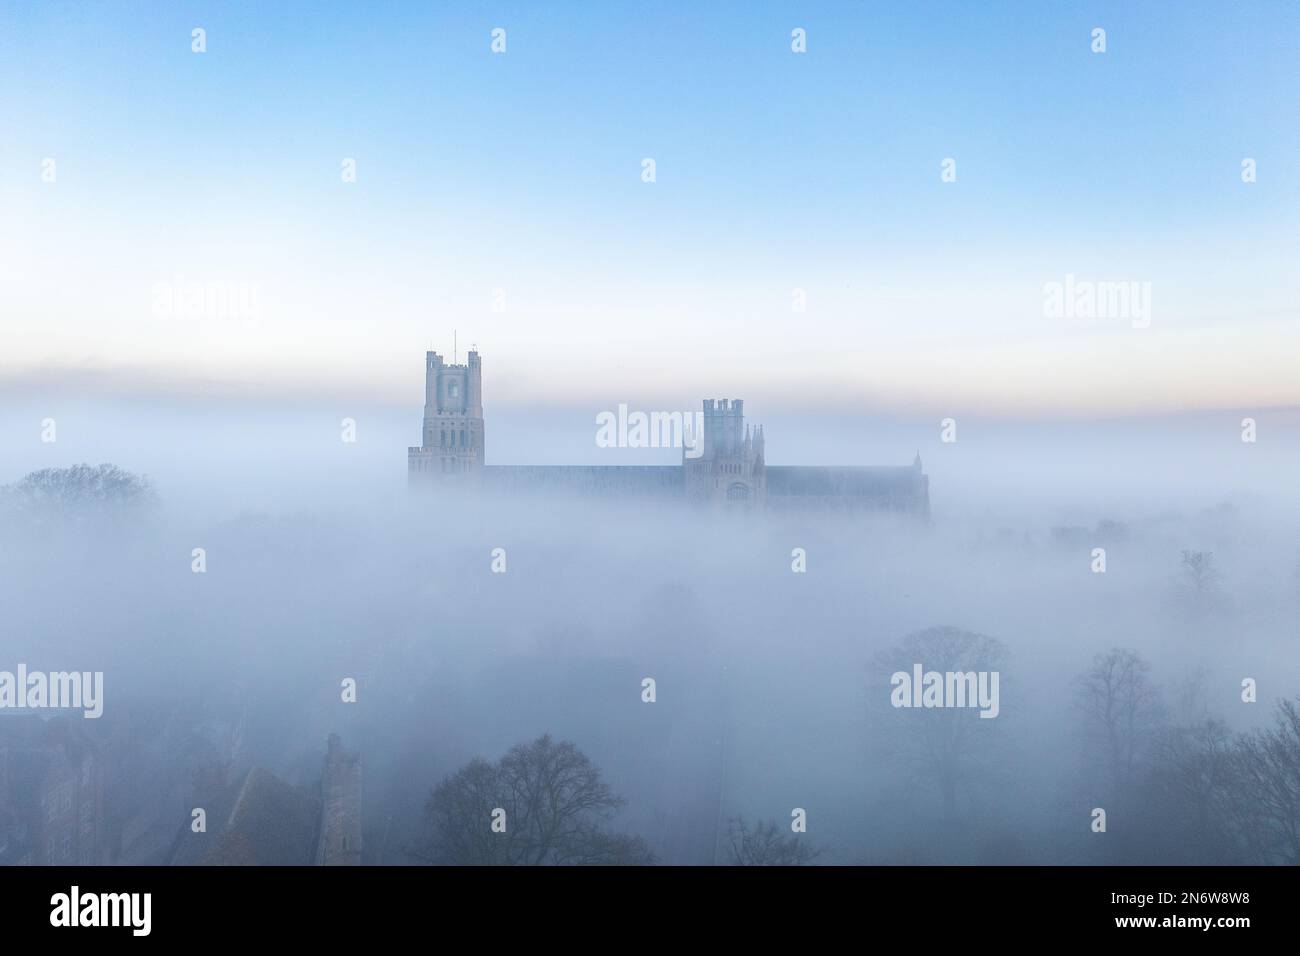 Picture dated February 6th shows Ely Cathedral in Cambridgeshire,known as the Ship of the Fens, shrouded in fog on  Monday  morning.  Majestic Ely Cat Stock Photo